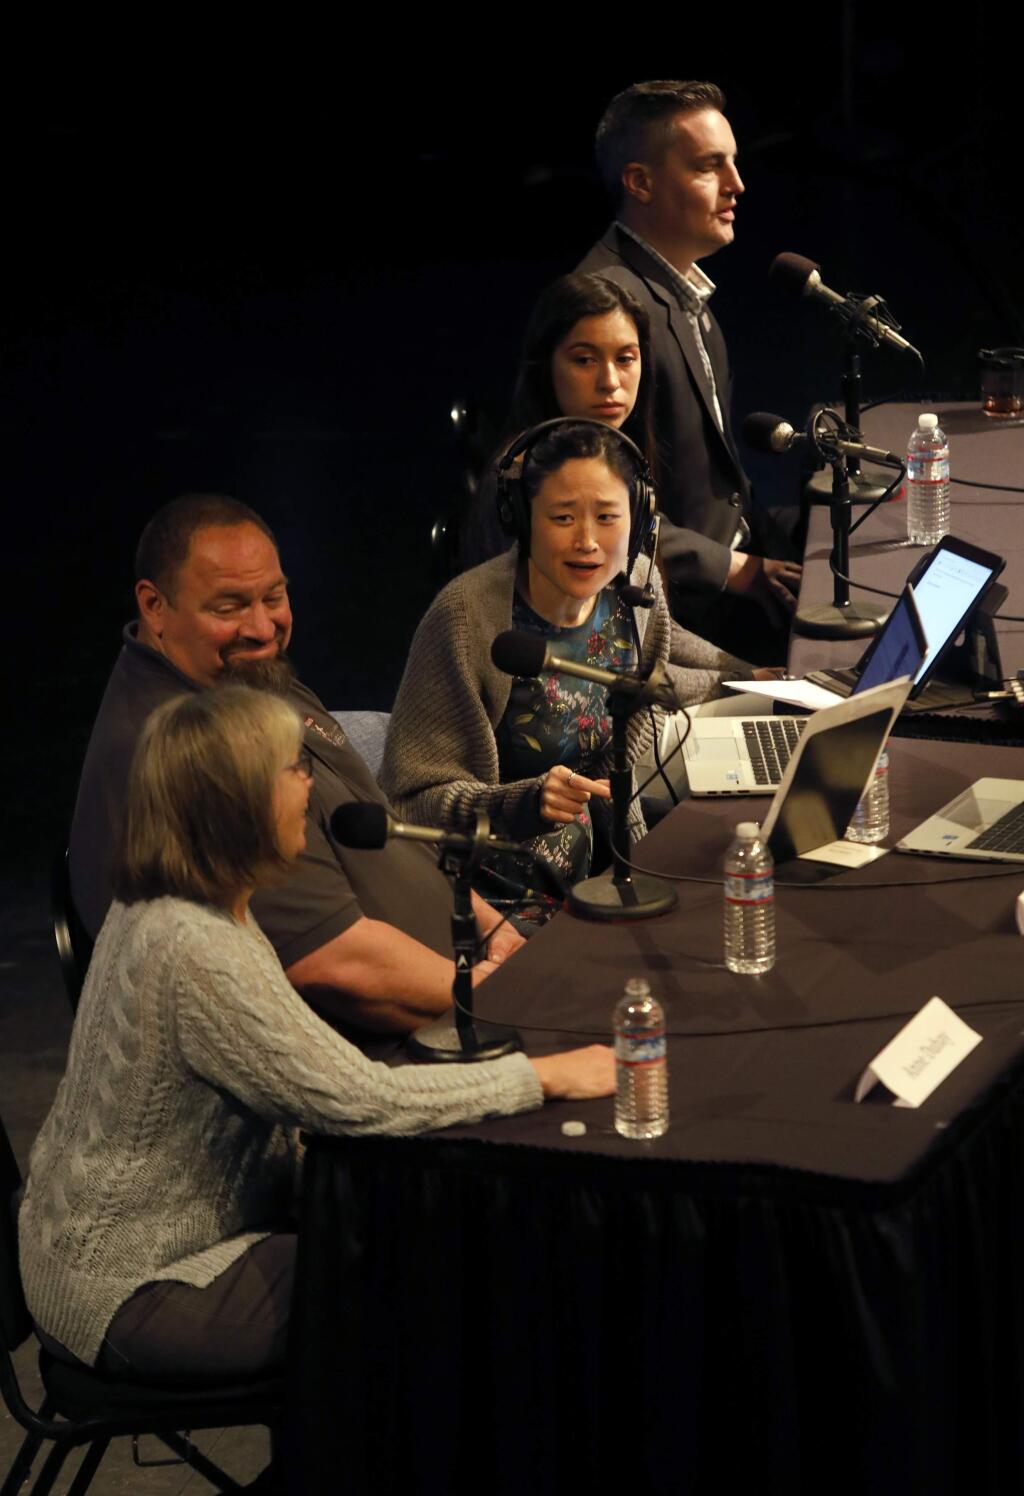 KQED's Forum host Mina Kim, center, talks with guests (From bottom) Anne DuBay, Chris Keys, Dayren Torres, and Jeff Okrepkie, at the Luther Burbank Center for the Arts in Santa Rosa, on Friday, April 6, 2018. (BETH SCHLANKER/ The Press Democrat)